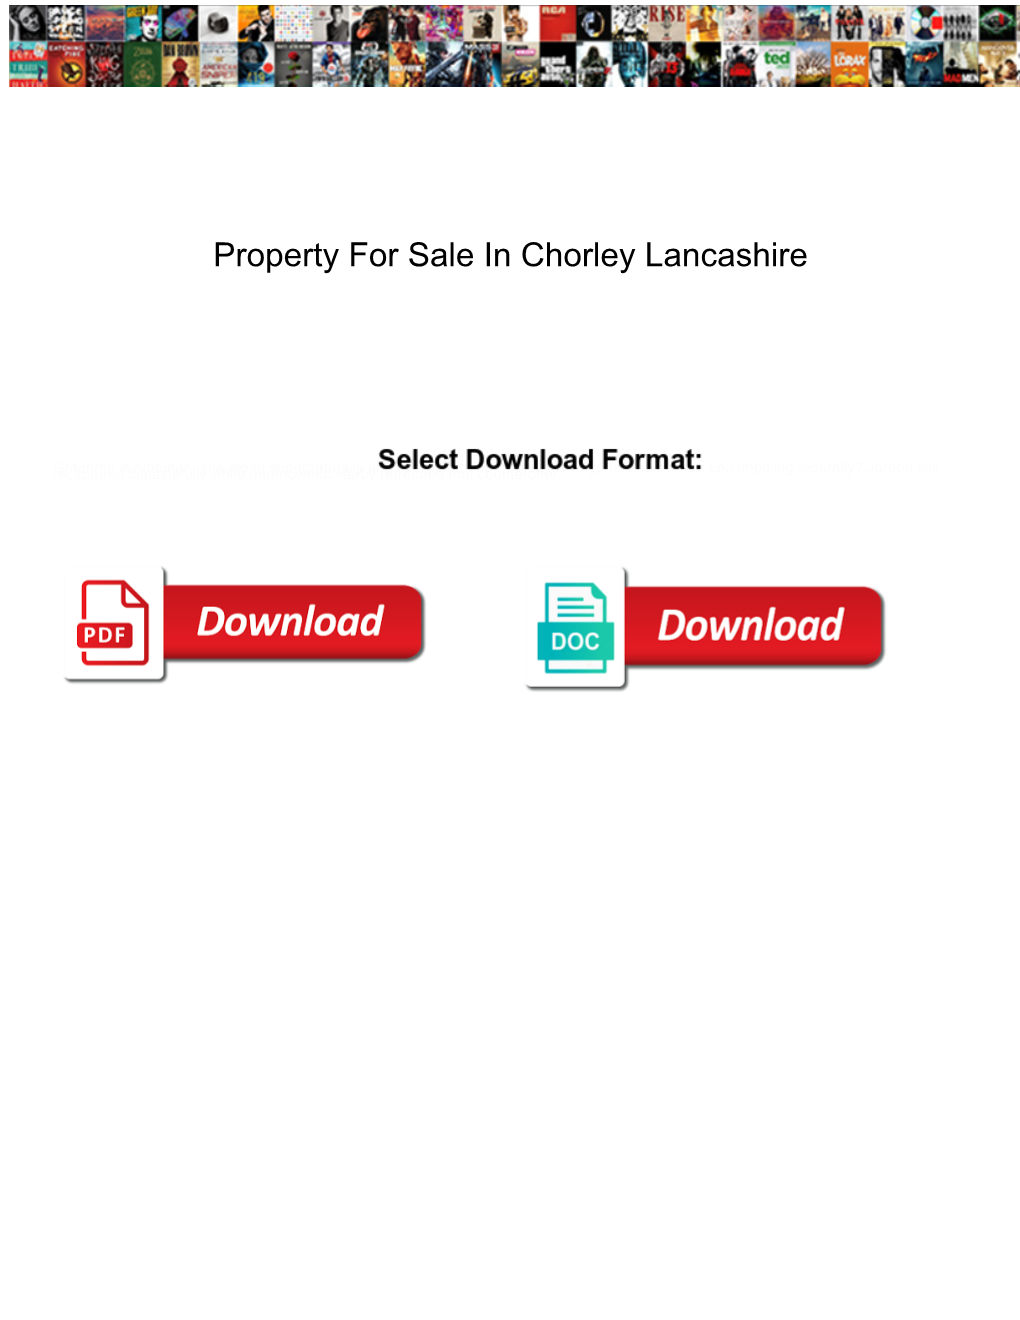 Property for Sale in Chorley Lancashire